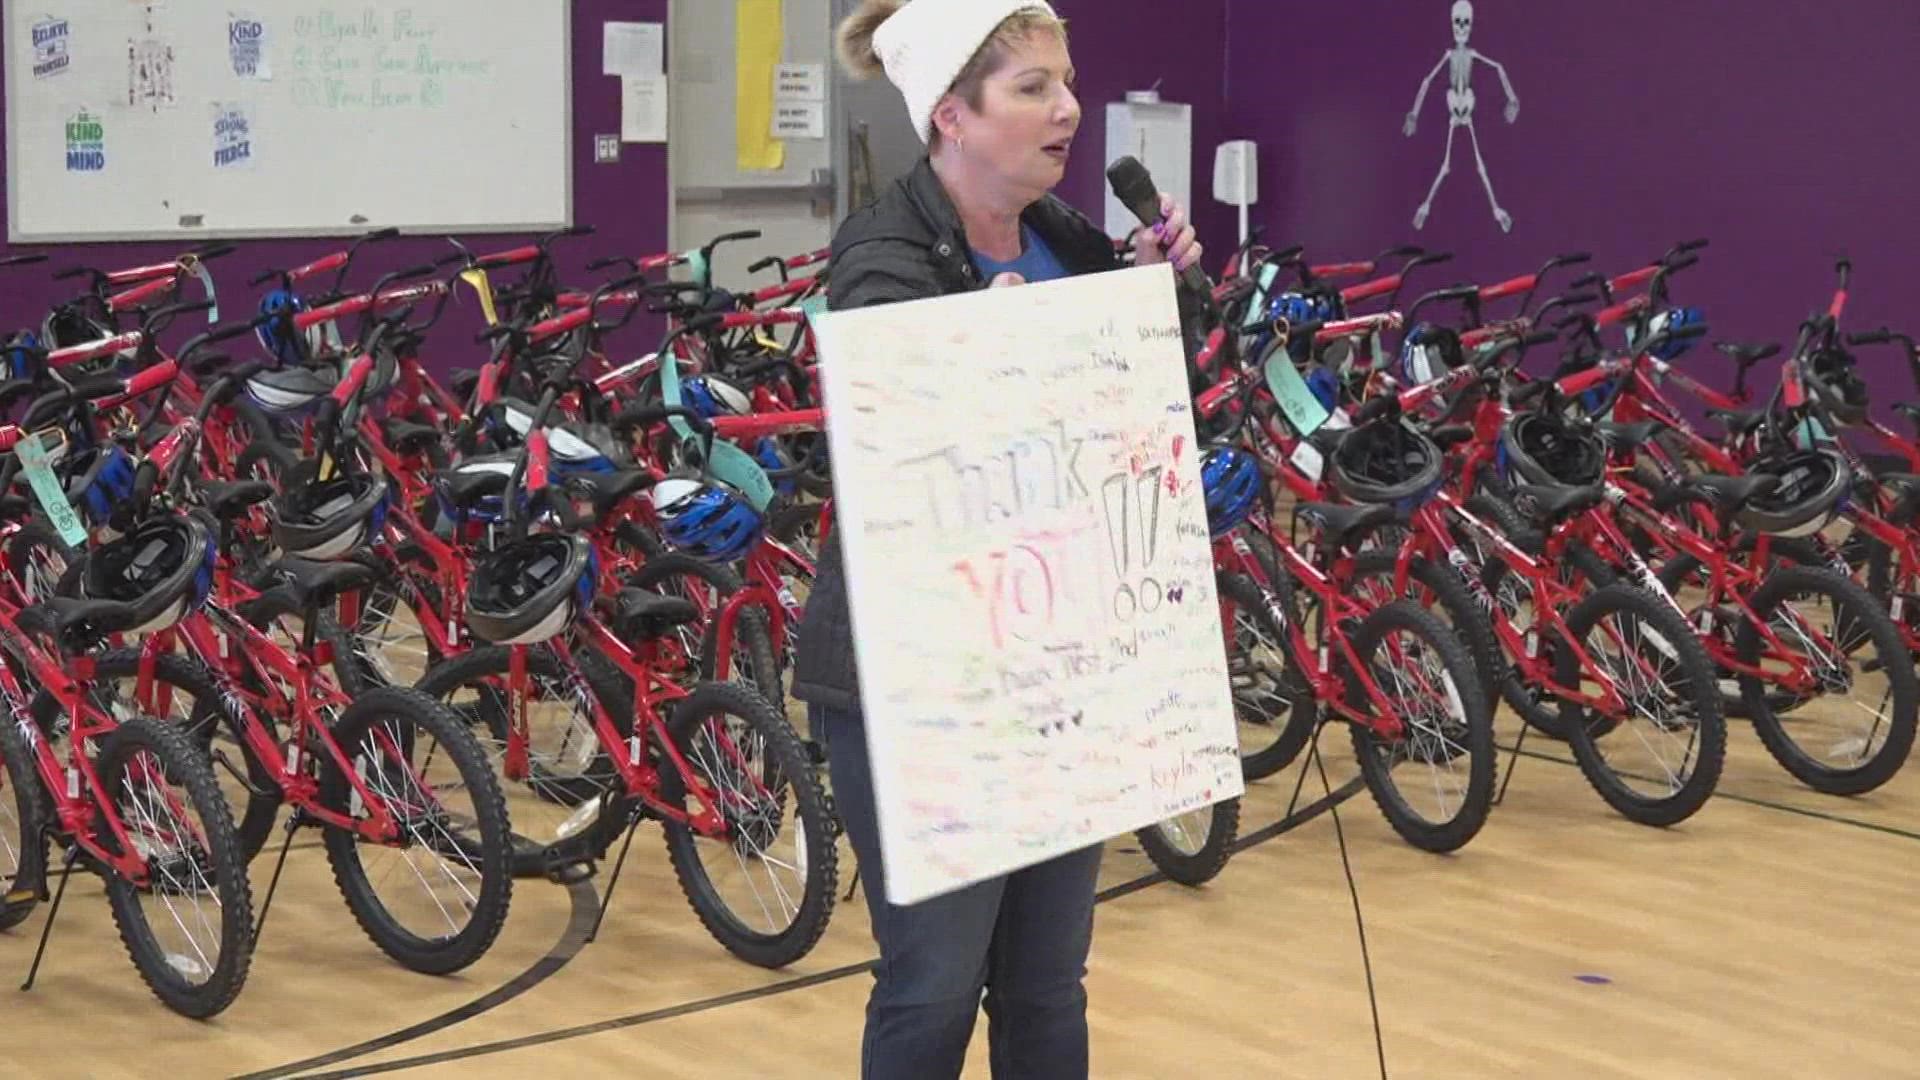 Over 250 students were gifted bikes through the 'Wish for Wheels' program.